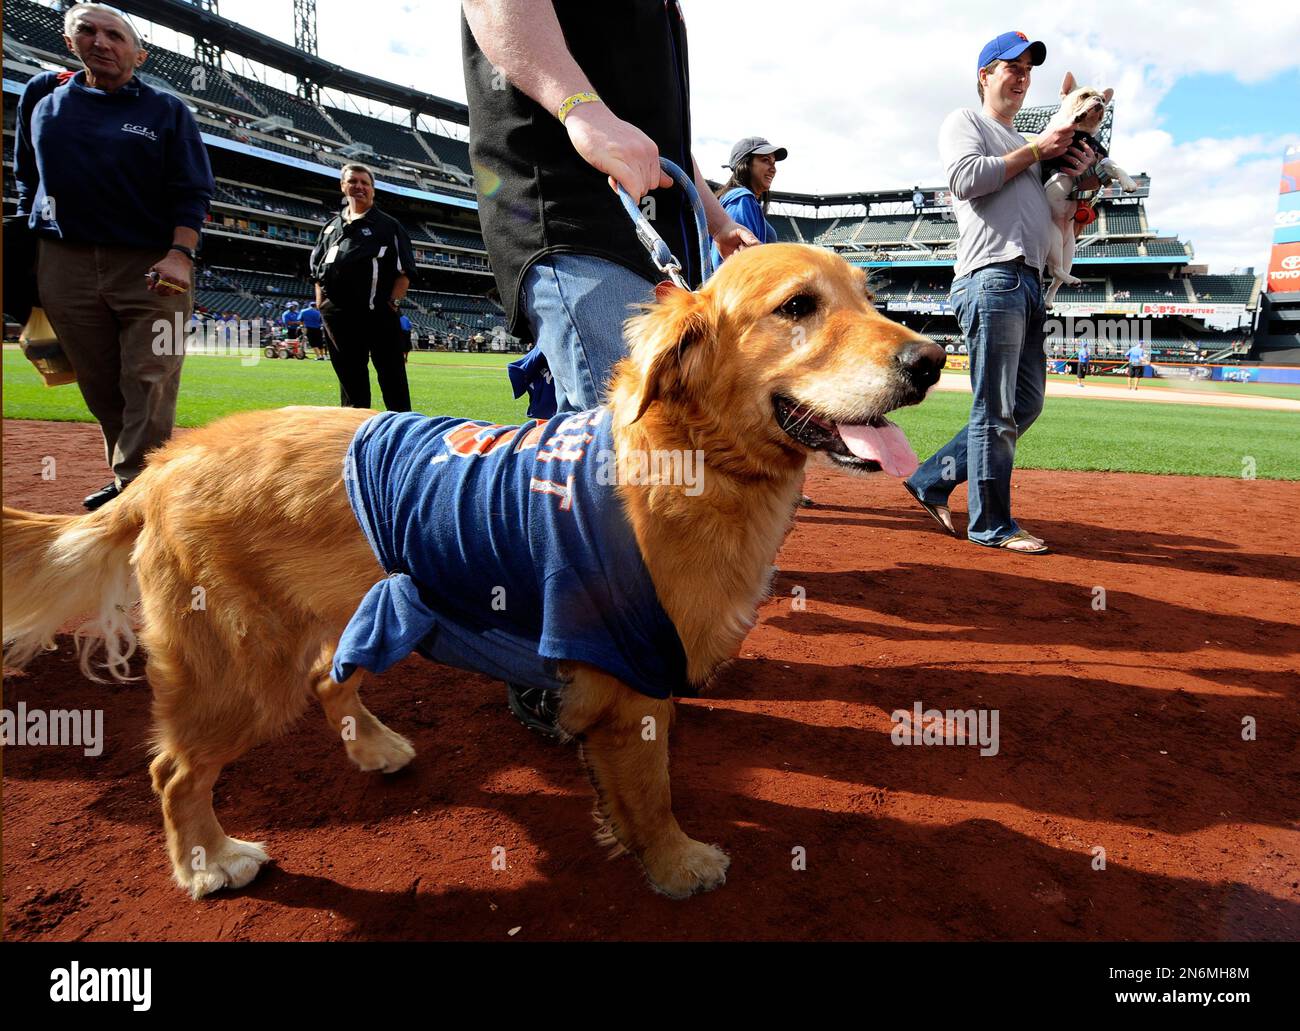 A dog walks around the field during Bark in the Park day at Citi